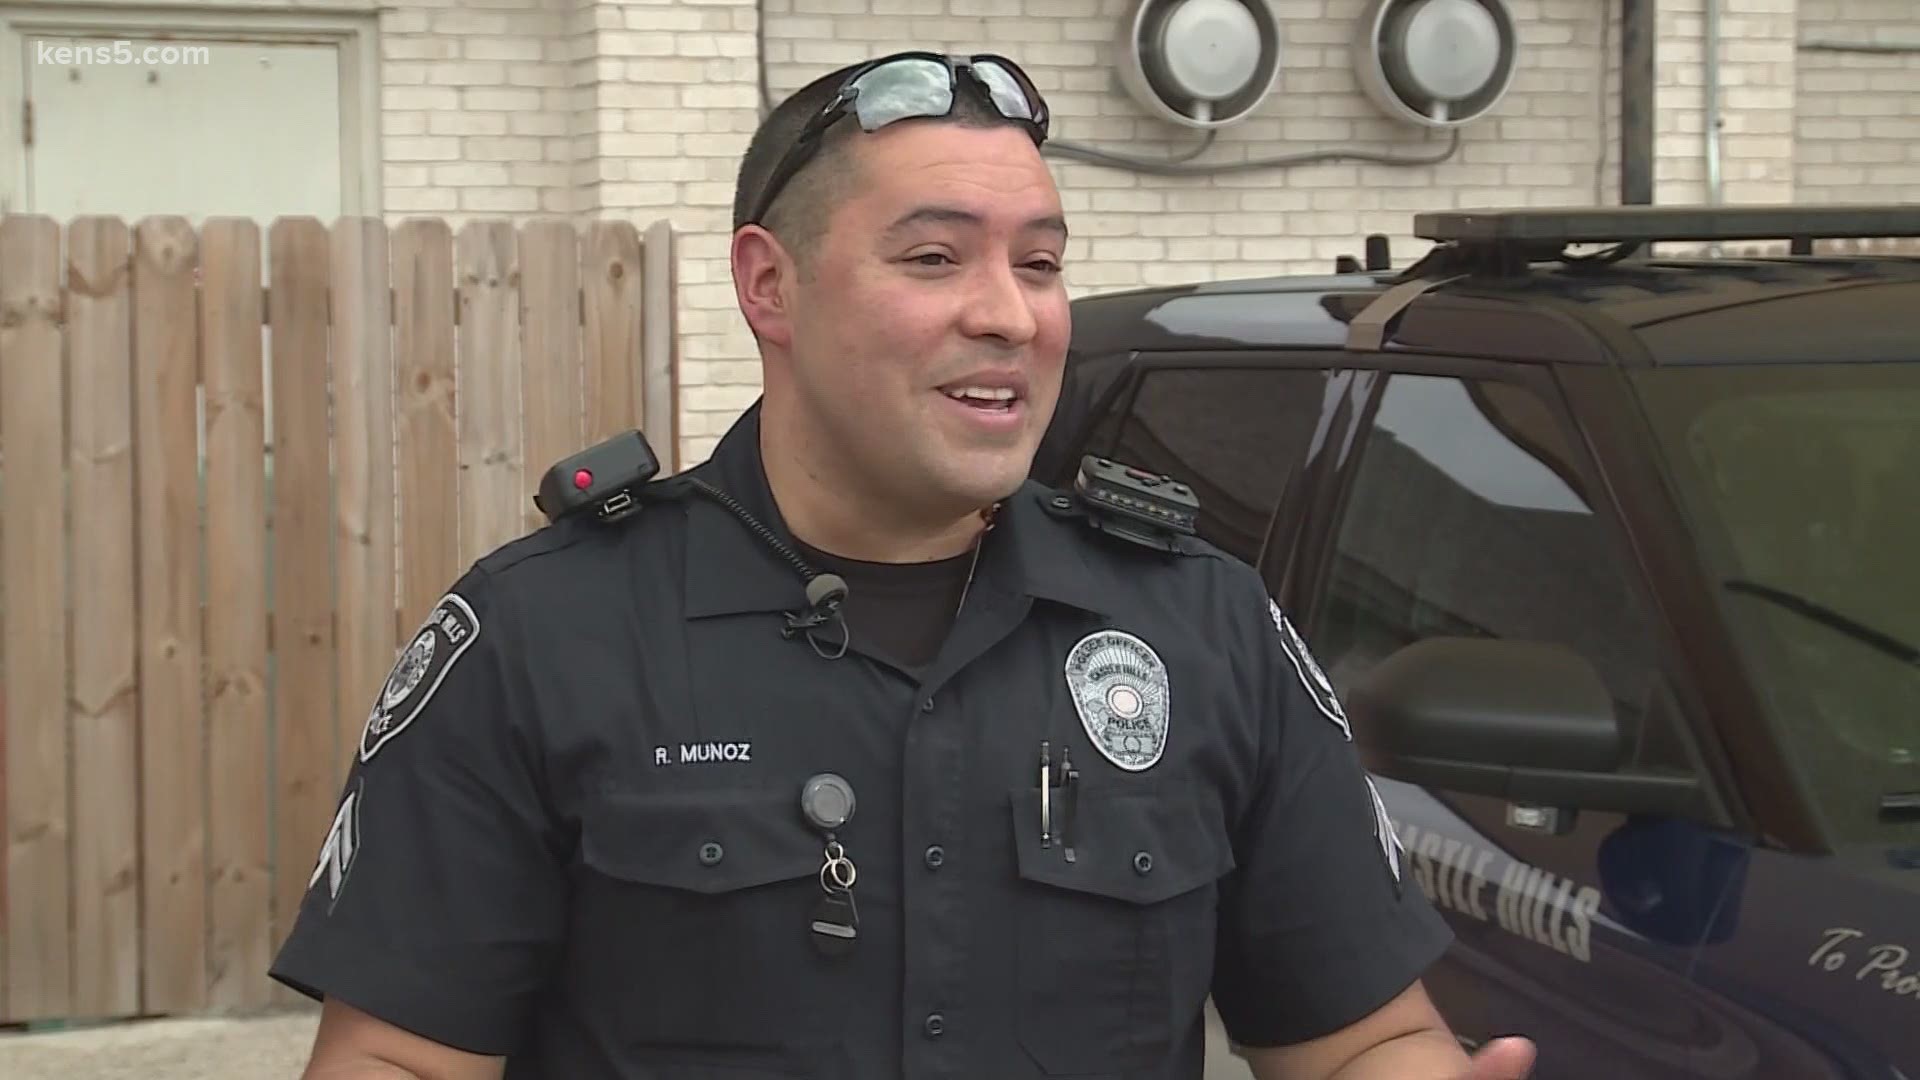 Corporal Romeo Munoz said he had no choice but to jump off a bridge onto concrete to avoid a driver that killed one and injured several others.